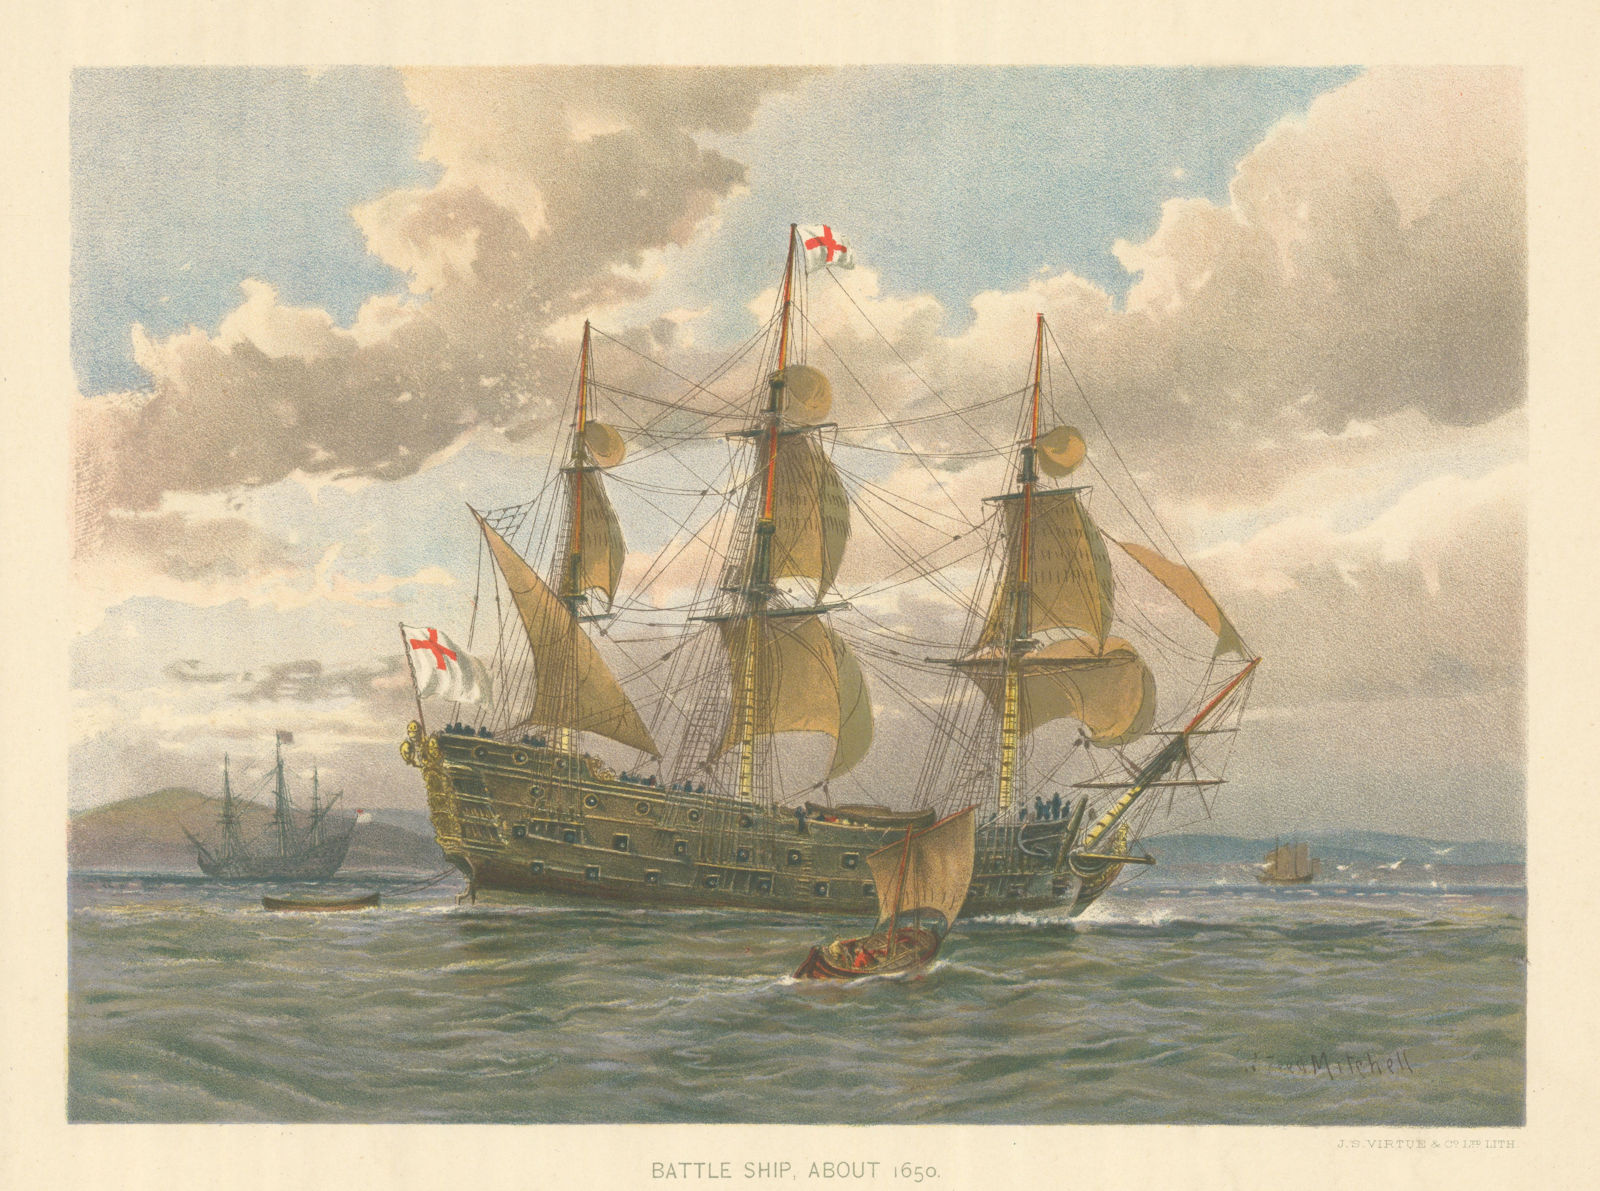 Battle Ship about 1650 by W.F. Mitchell. Royal Navy 1893 old antique print